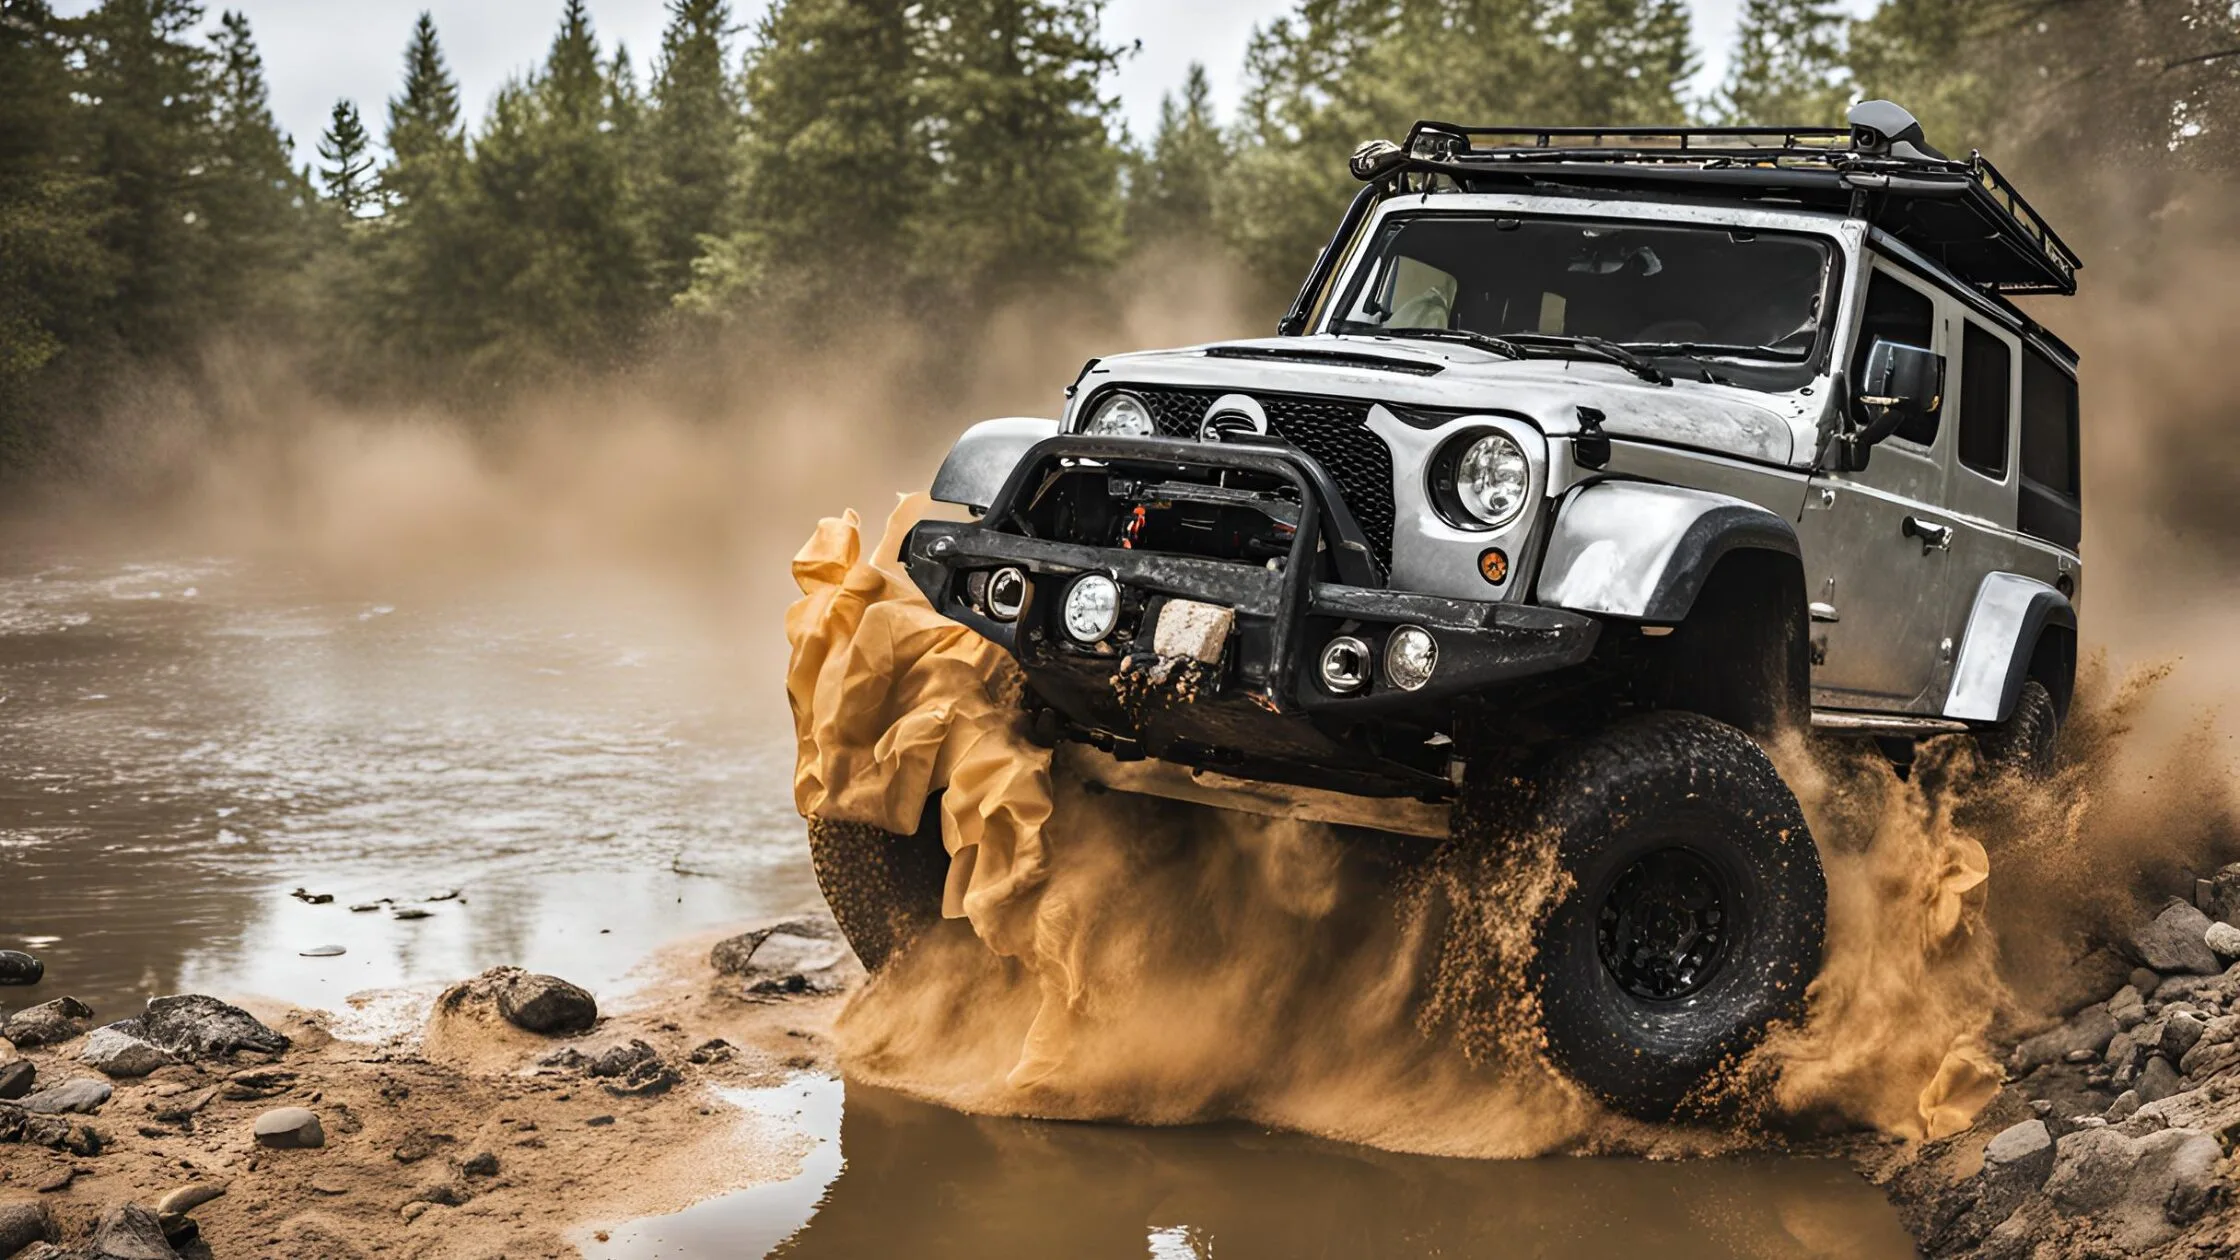 Waterproofing for Off-Roading